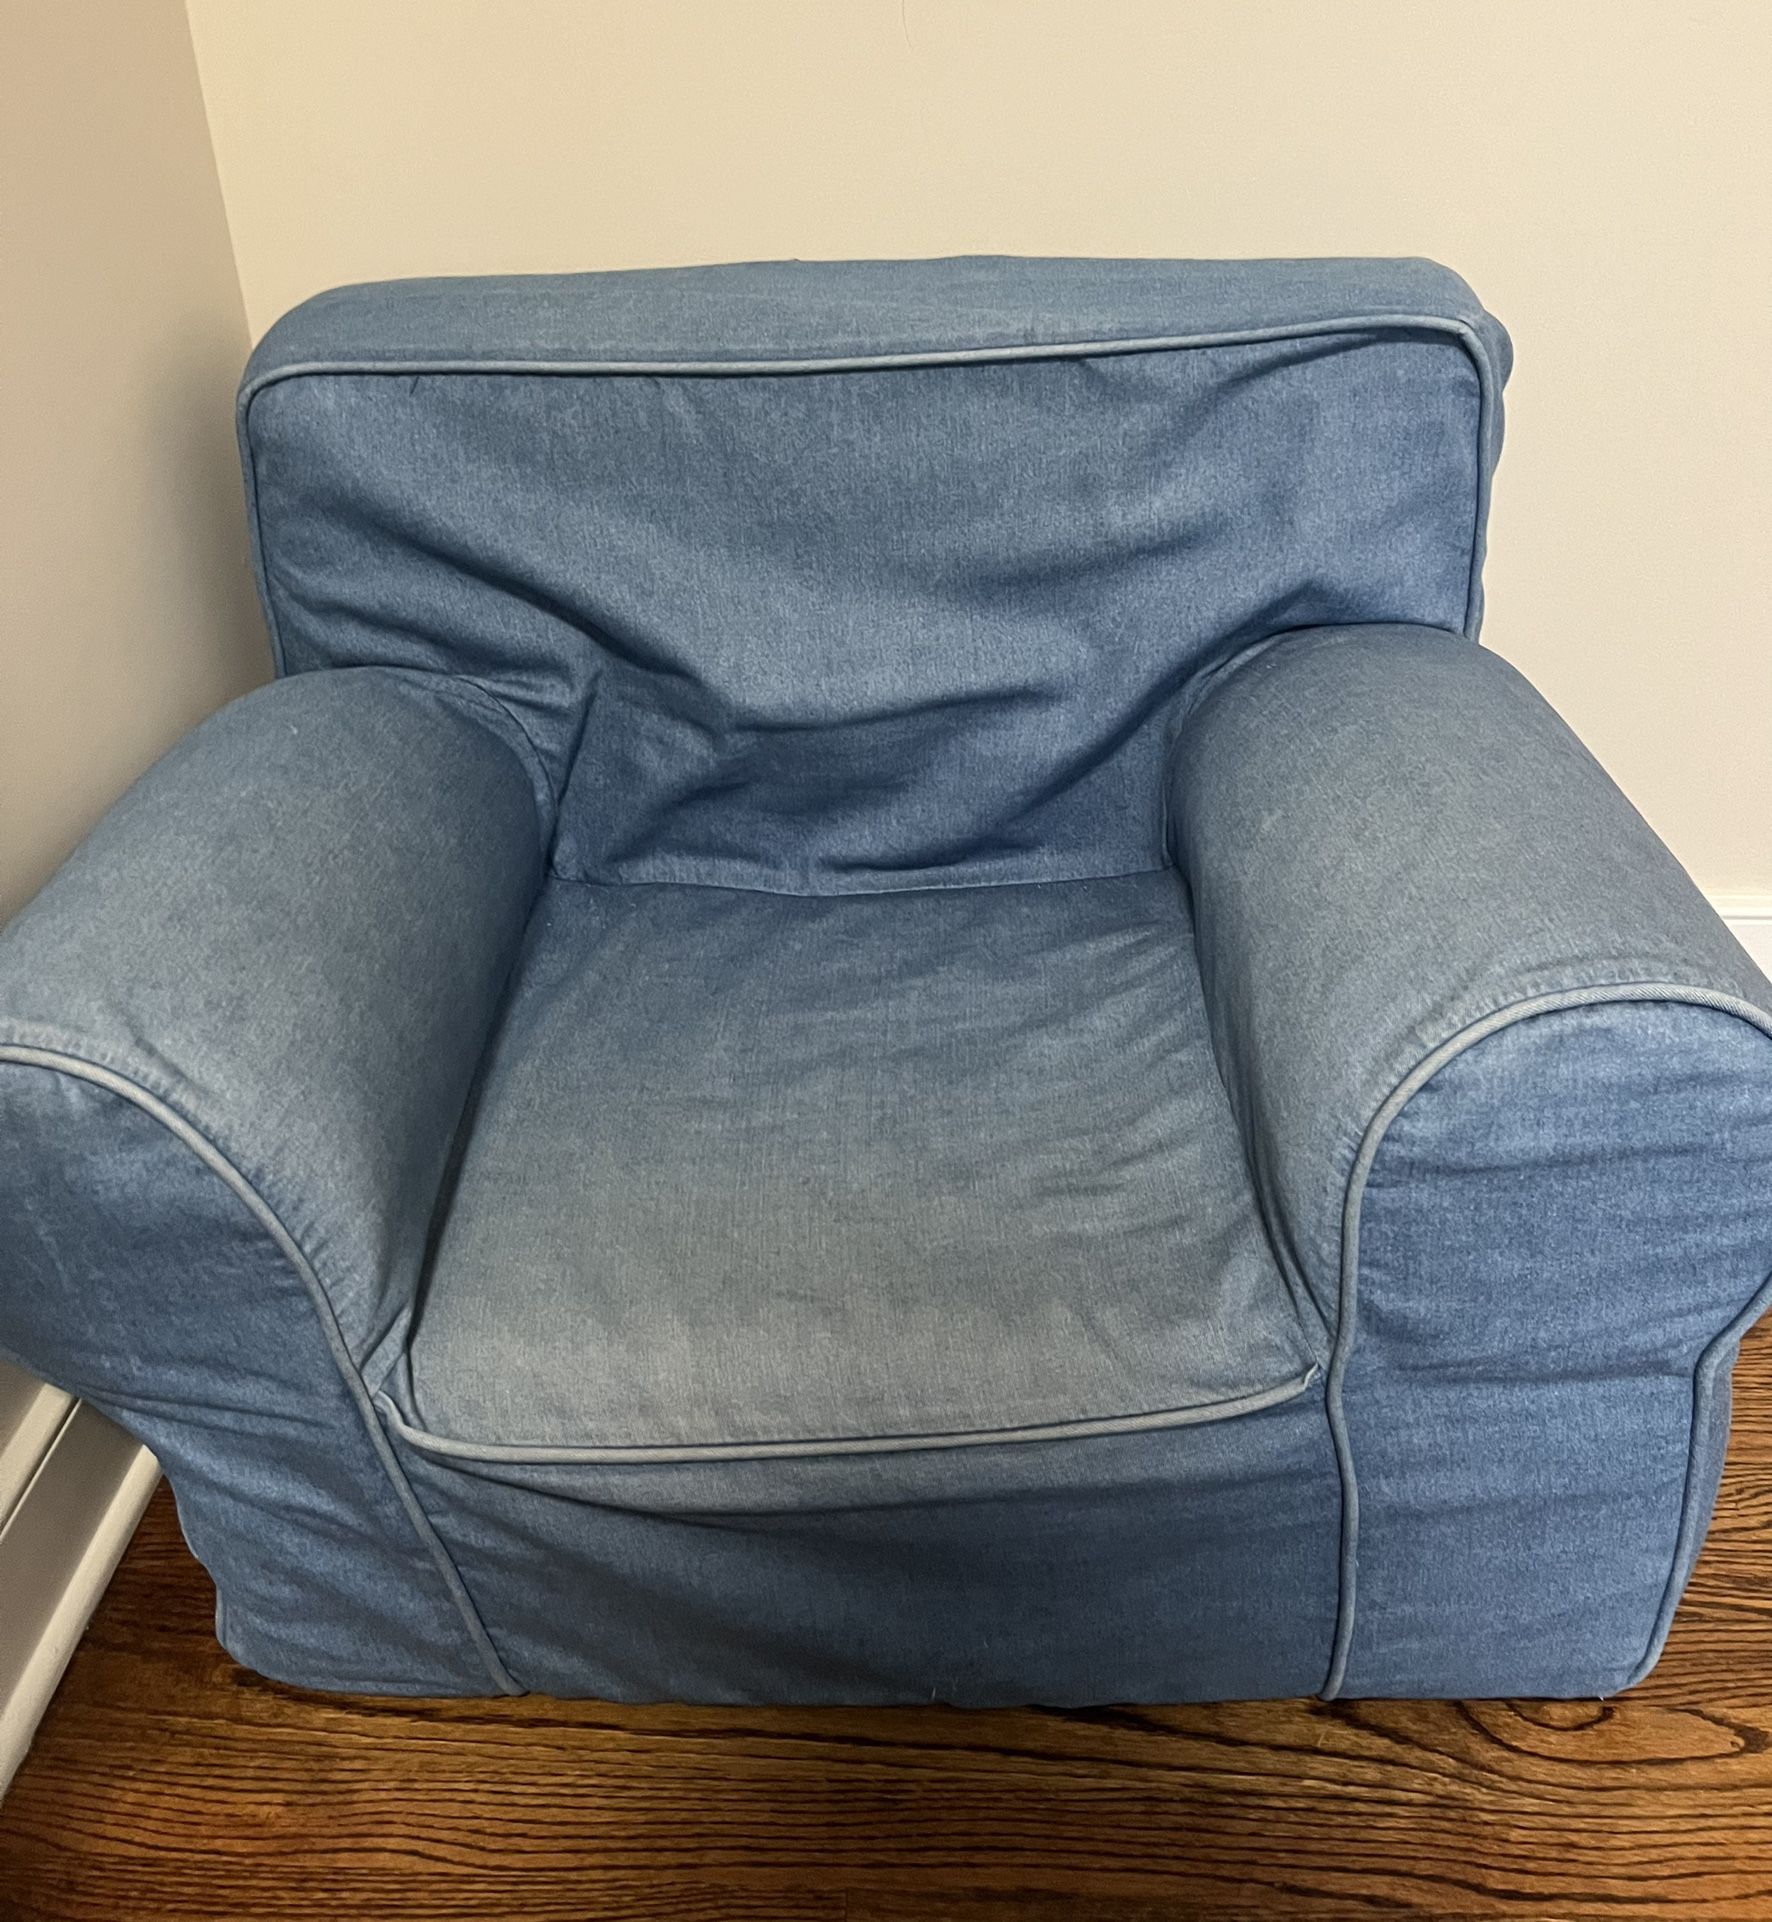 Pottery Barn Kids Oversized Anywhere Chair with Denim Cover  